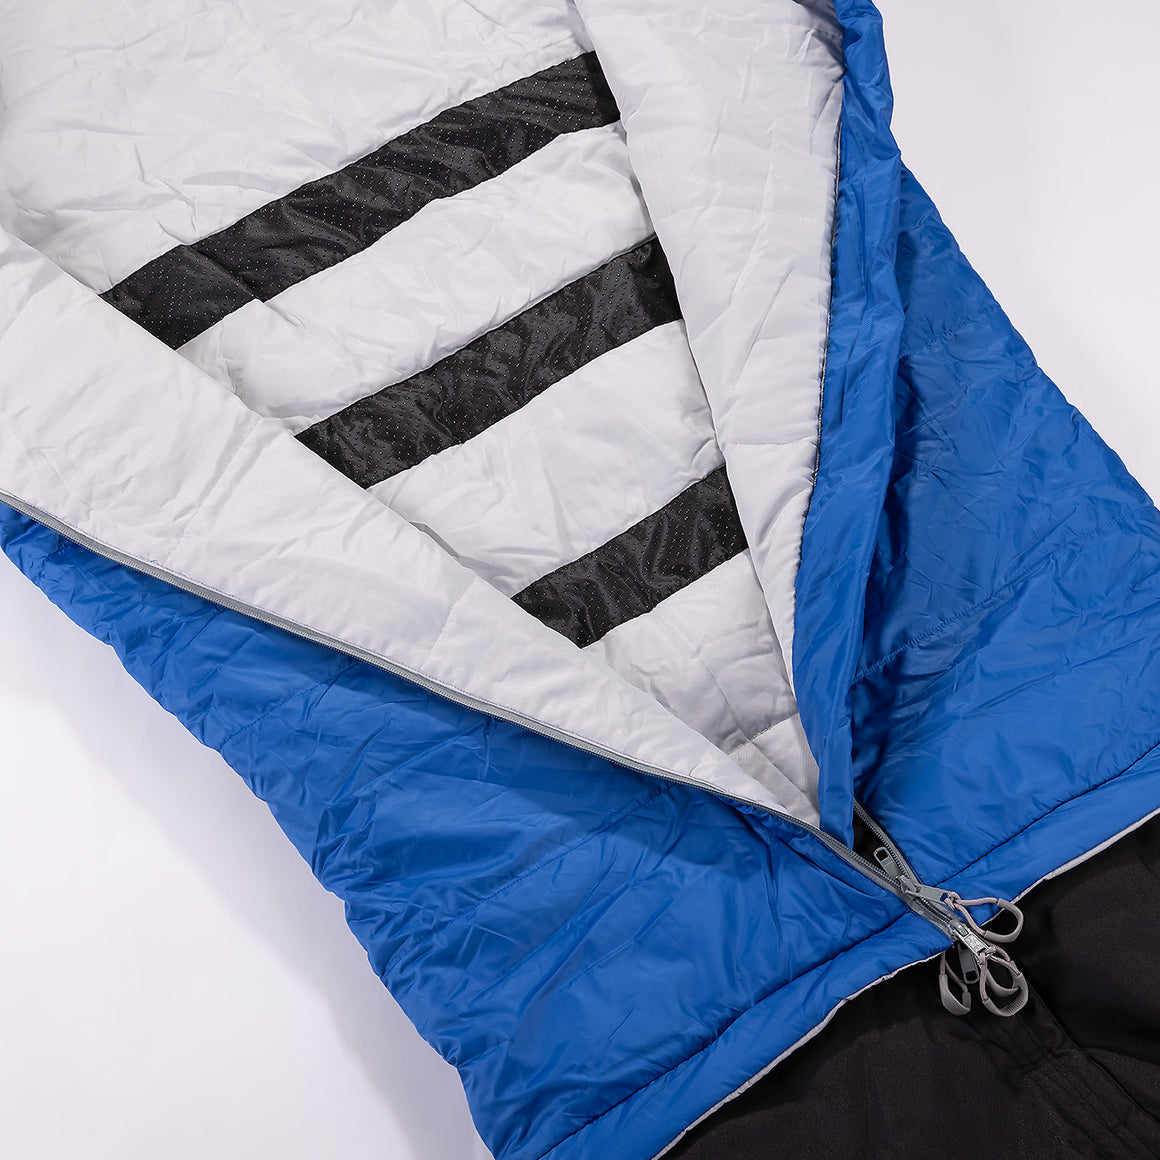 Cozybag Zippy - our extra wide sleeping bag with sleeves